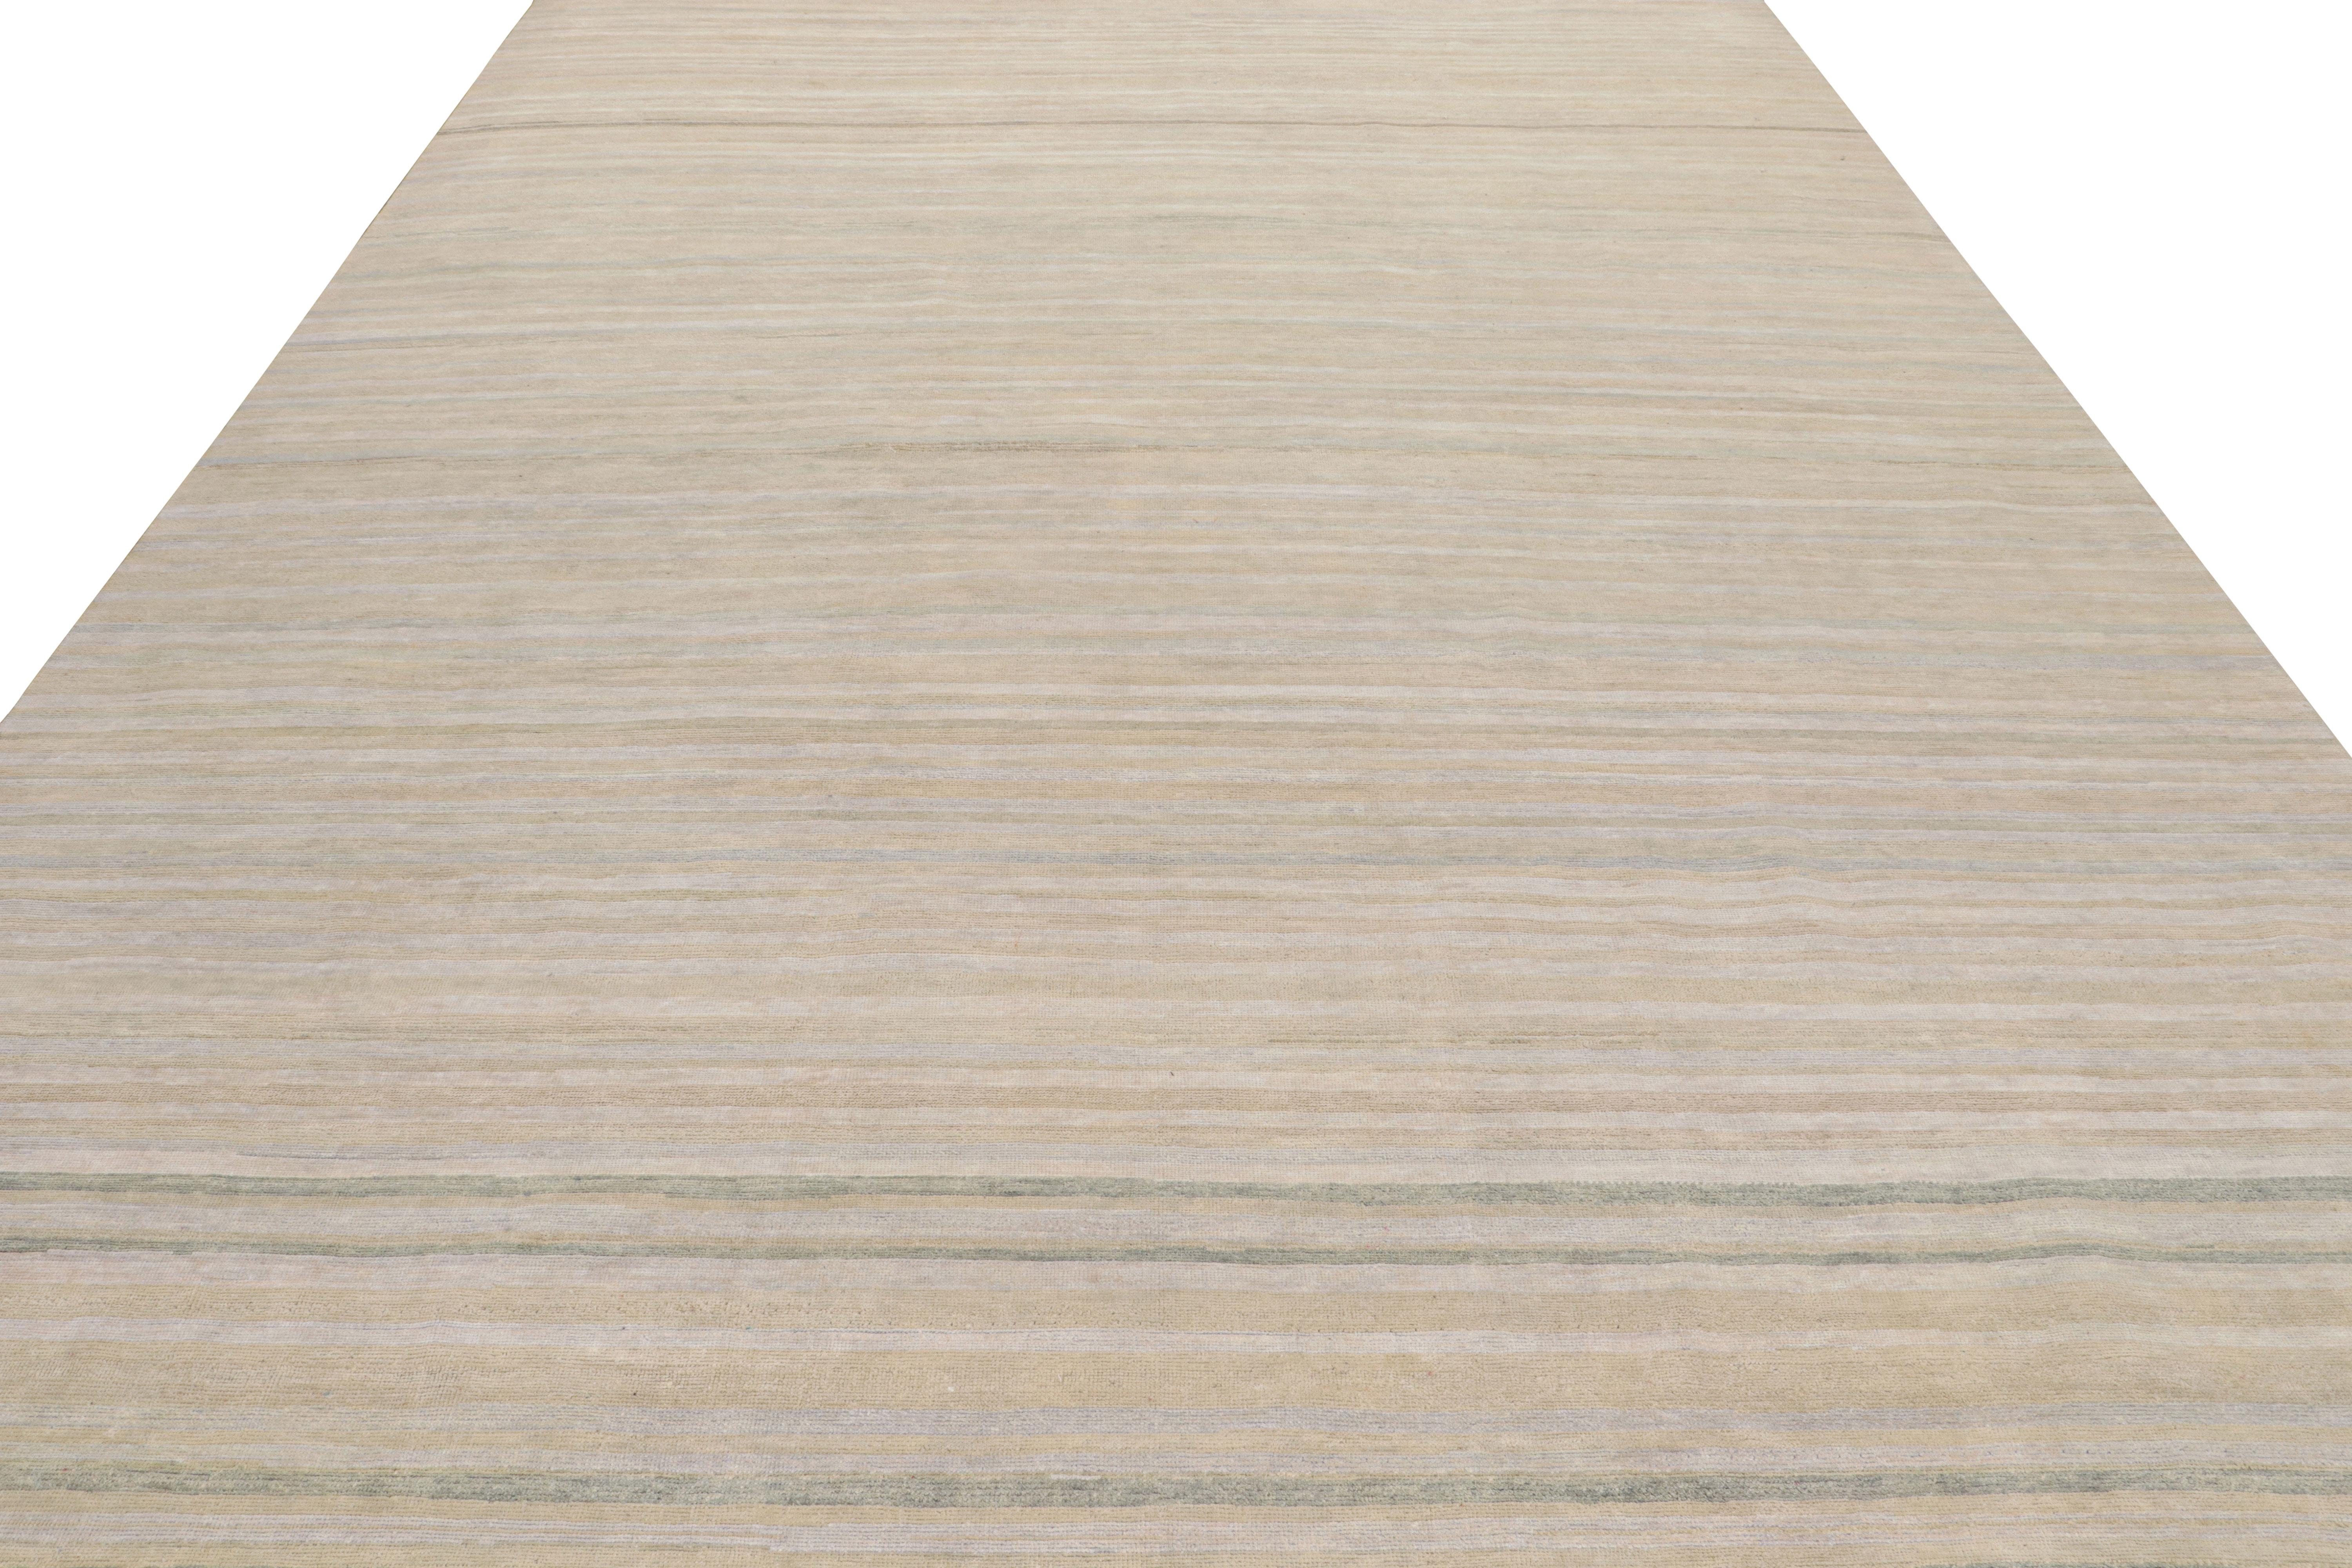 Rug & Kilim’s Modern Textural Rug in Creamy Beige and Light Blue Stripes In New Condition For Sale In Long Island City, NY